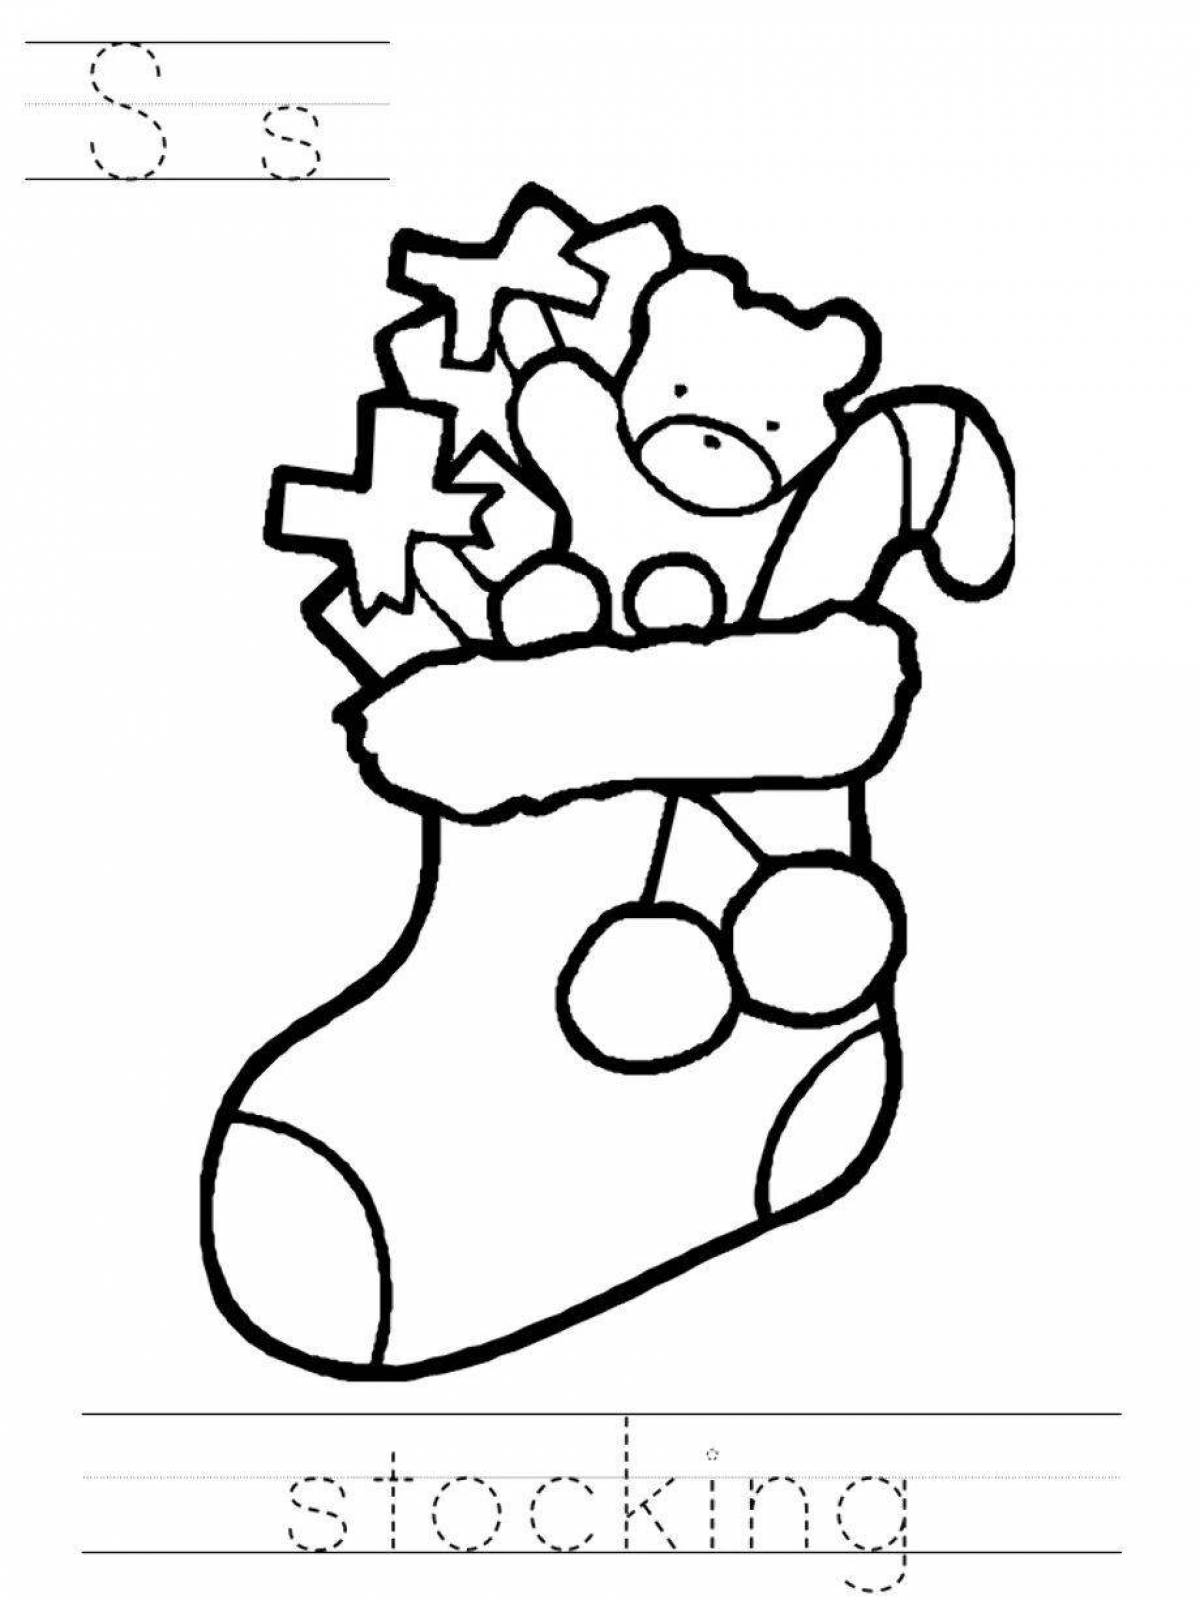 Live stocking coloring page